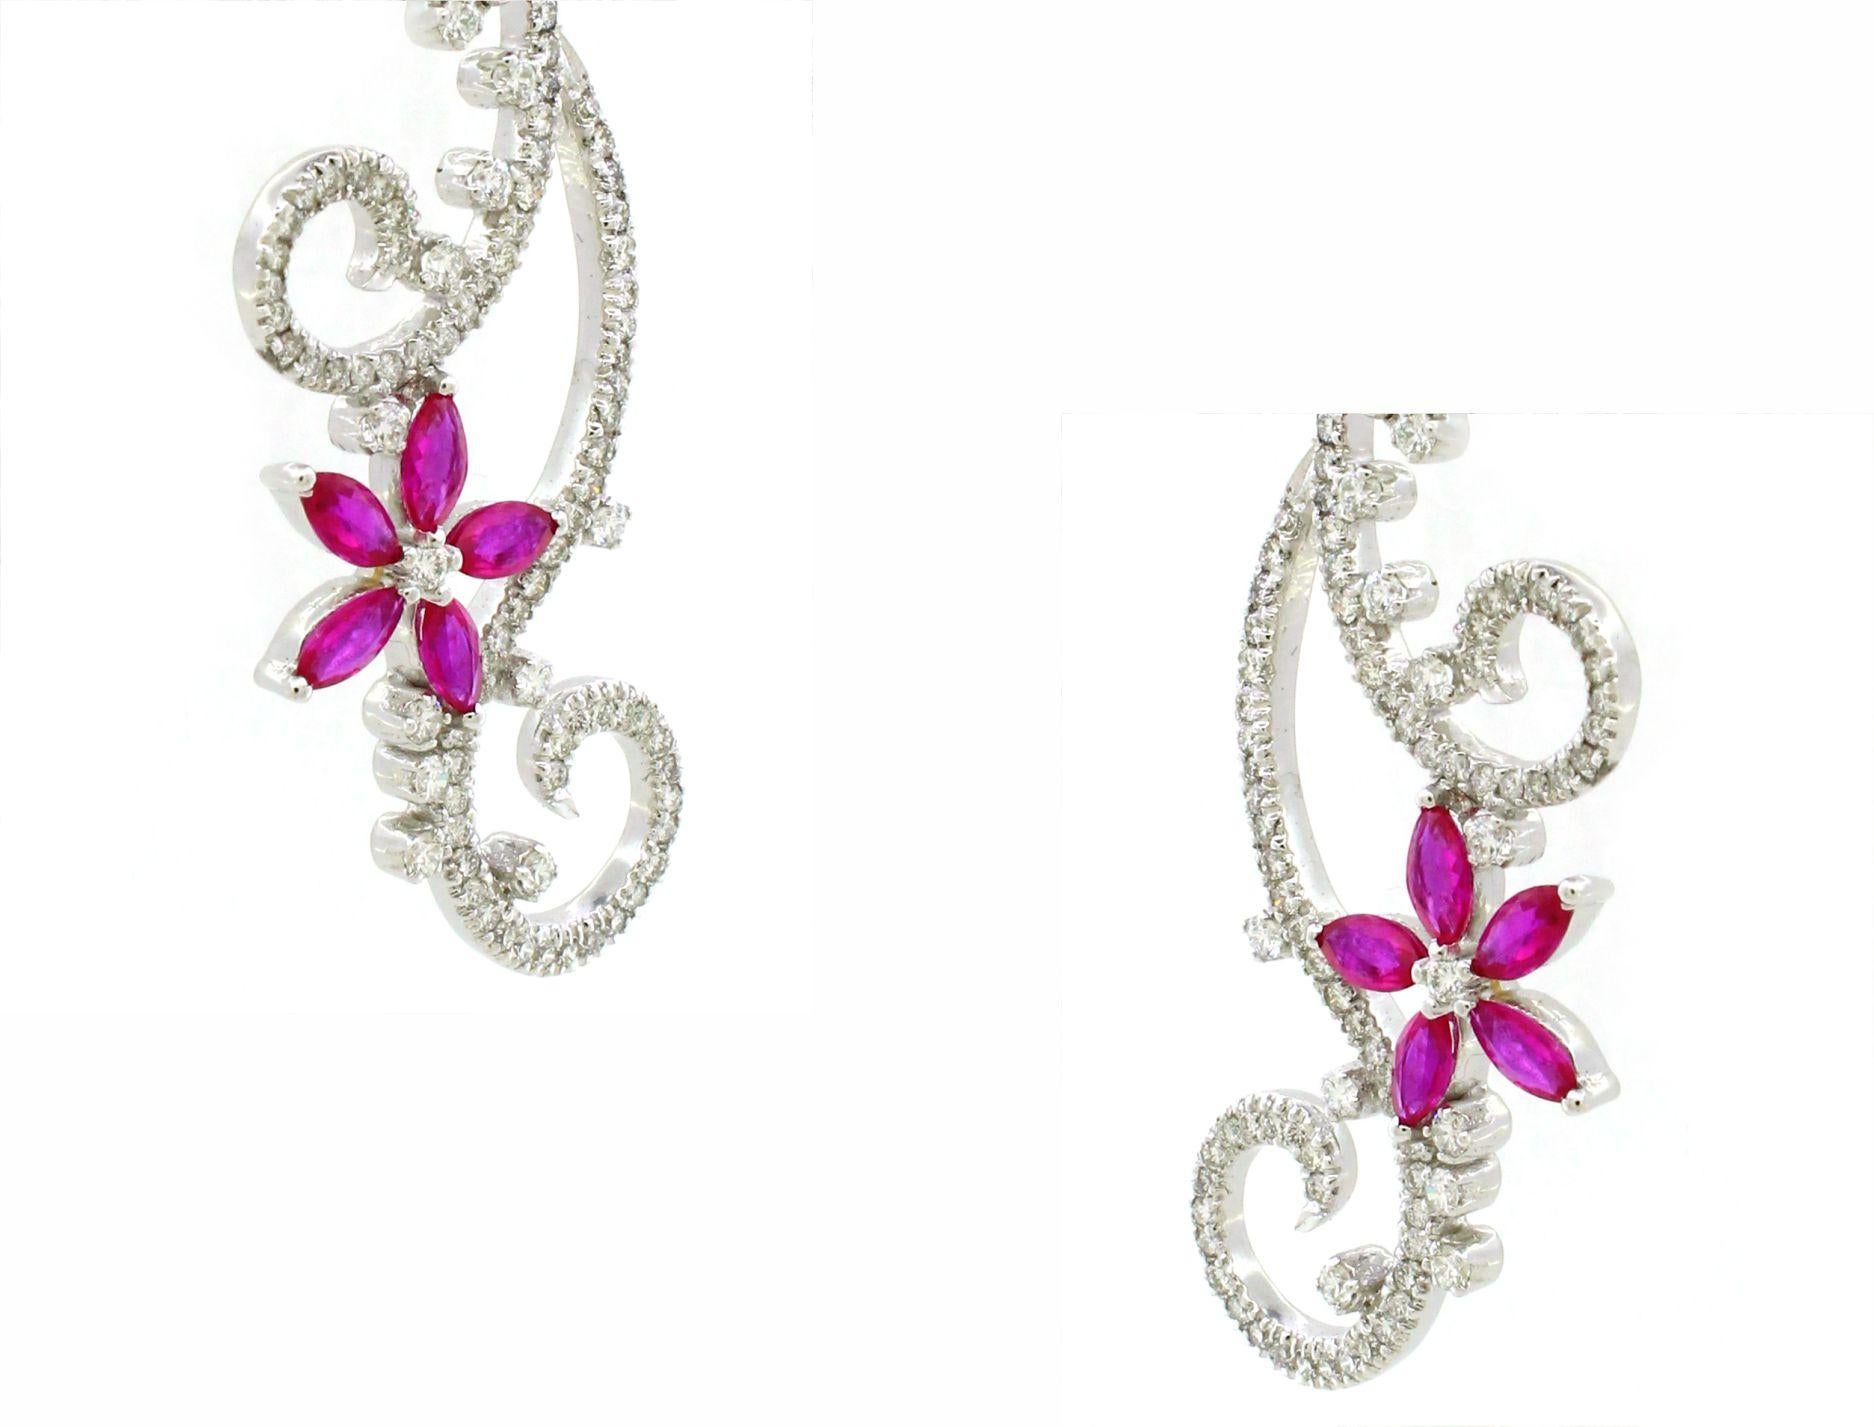 Marquise Cut 3.53 carats of Ruby earrings  For Sale